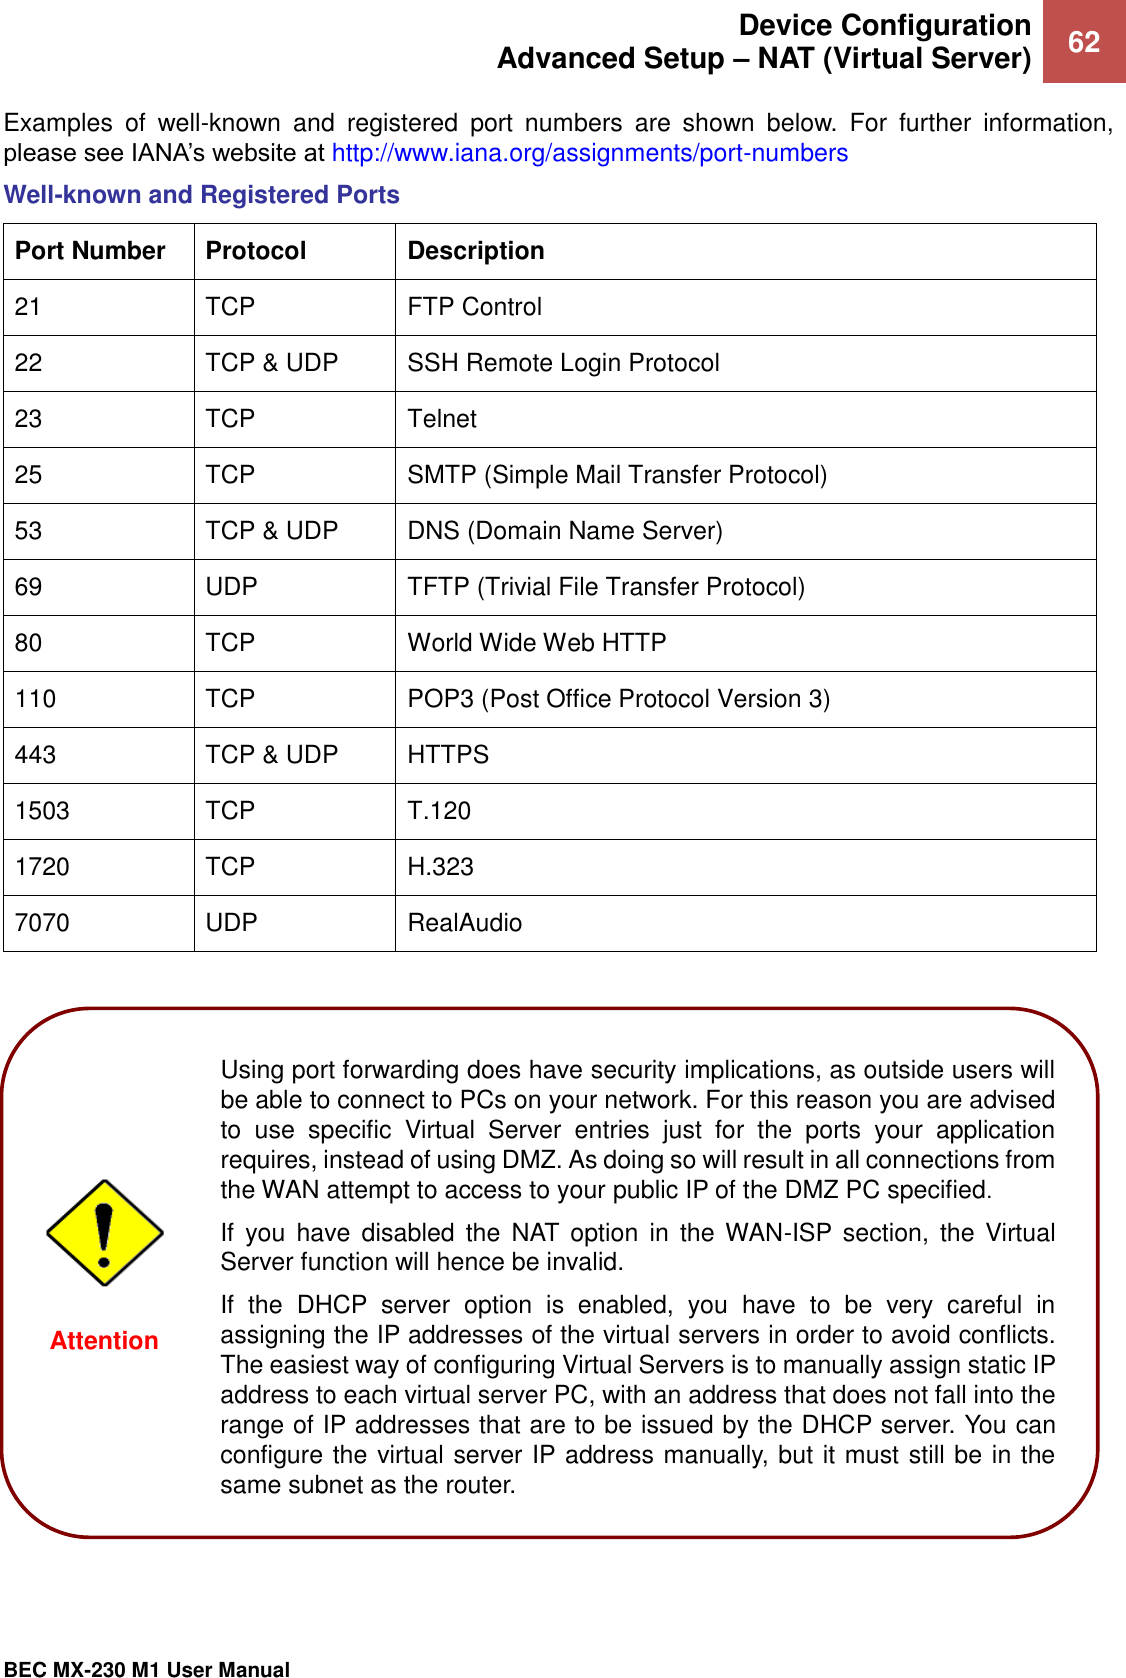  Device Configuration Advanced Setup – NAT (Virtual Server) 62   BEC MX-230 M1 User Manual  Examples  of  well-known  and  registered  port  numbers  are  shown  below.  For  further  information, please see IANA’s website at http://www.iana.org/assignments/port-numbers Well-known and Registered Ports Port Number Protocol Description 21 TCP FTP Control 22 TCP &amp; UDP SSH Remote Login Protocol 23 TCP Telnet 25 TCP SMTP (Simple Mail Transfer Protocol) 53 TCP &amp; UDP DNS (Domain Name Server) 69 UDP TFTP (Trivial File Transfer Protocol) 80 TCP World Wide Web HTTP 110 TCP POP3 (Post Office Protocol Version 3) 443 TCP &amp; UDP HTTPS 1503 TCP T.120 1720 TCP H.323 7070 UDP RealAudio   Using port forwarding does have security implications, as outside users will be able to connect to PCs on your network. For this reason you are advised to  use  specific  Virtual  Server  entries  just  for  the  ports  your  application requires, instead of using DMZ. As doing so will result in all connections from the WAN attempt to access to your public IP of the DMZ PC specified. If  you  have  disabled  the  NAT option  in  the  WAN-ISP  section,  the  Virtual Server function will hence be invalid. If  the  DHCP  server  option  is  enabled,  you  have  to  be  very  careful  in assigning the IP addresses of the virtual servers in order to avoid conflicts. The easiest way of configuring Virtual Servers is to manually assign static IP address to each virtual server PC, with an address that does not fall into the range of IP addresses that are to be issued by the DHCP server. You can configure the virtual server IP address manually, but it must still be in the same subnet as the router. Attention 